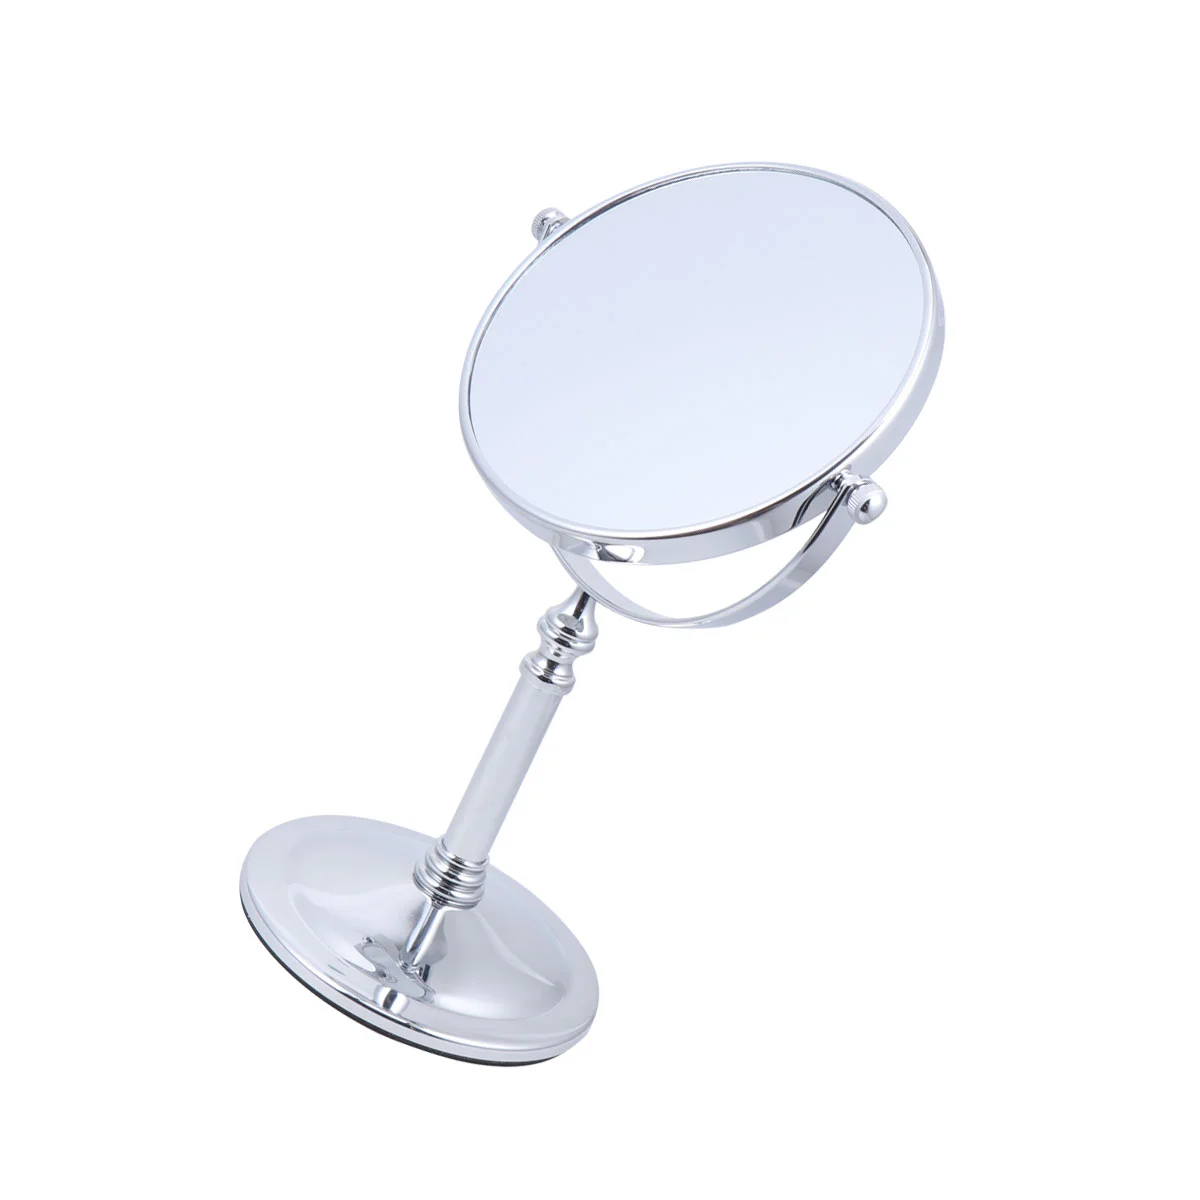 

Vanity Table Travel Vanity Vanity Magnifying Side Golden Table Double Magnification 3X Stand Swivel Home Two Bathroom Shaving